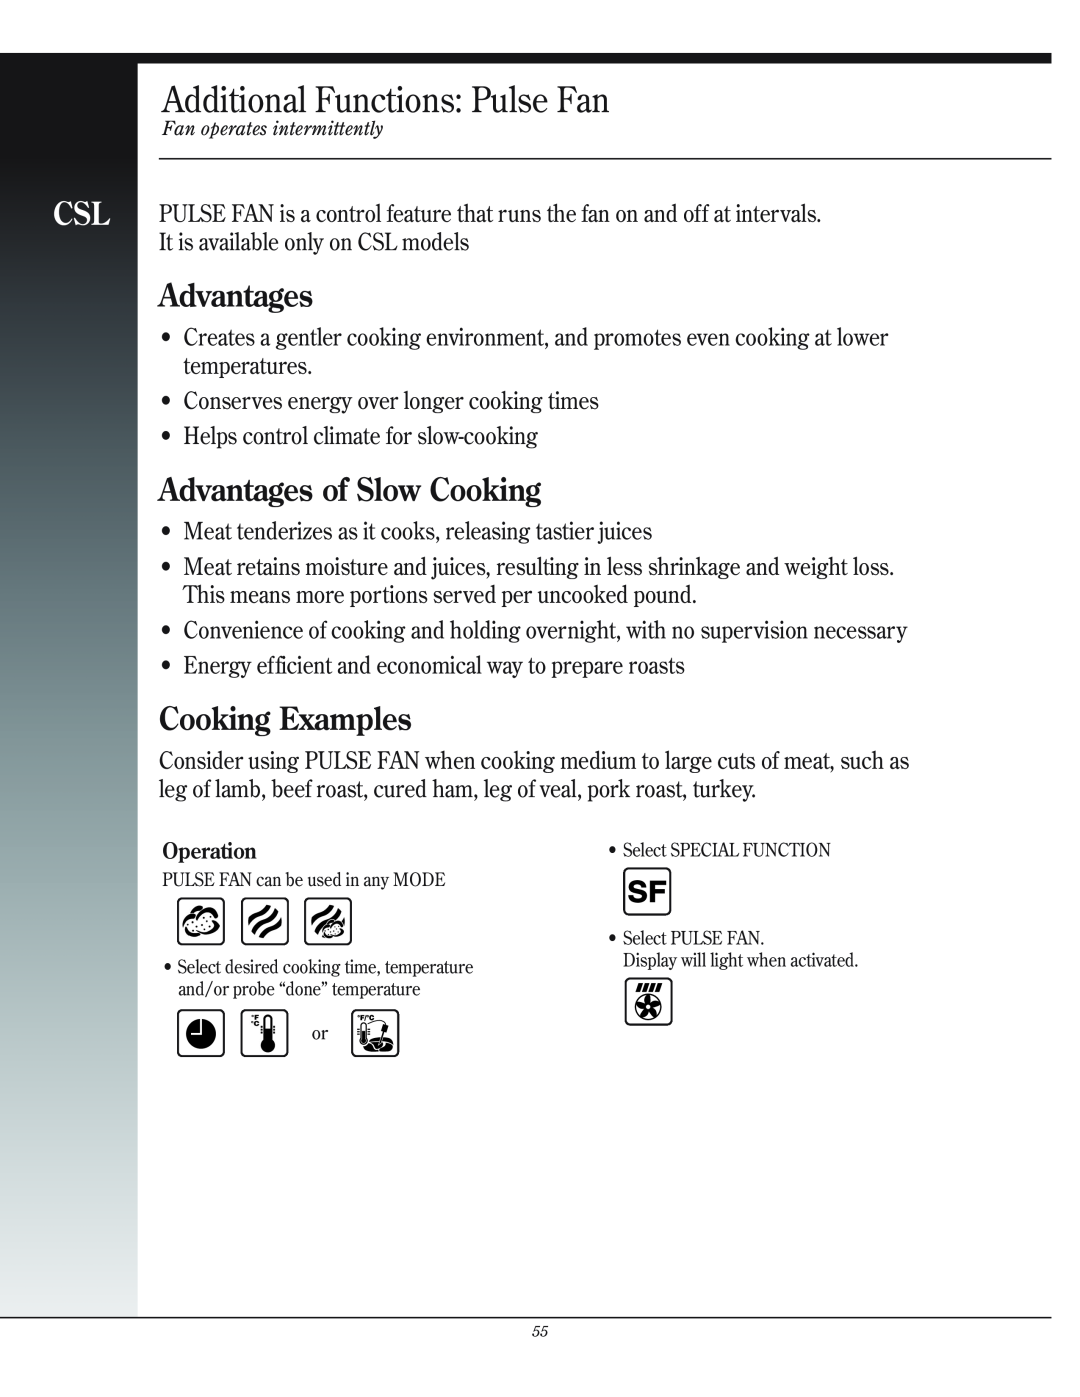 Henny Penny CSG manual Additional Functions Pulse Fan, Advantages of Slow Cooking, Cooking Examples 